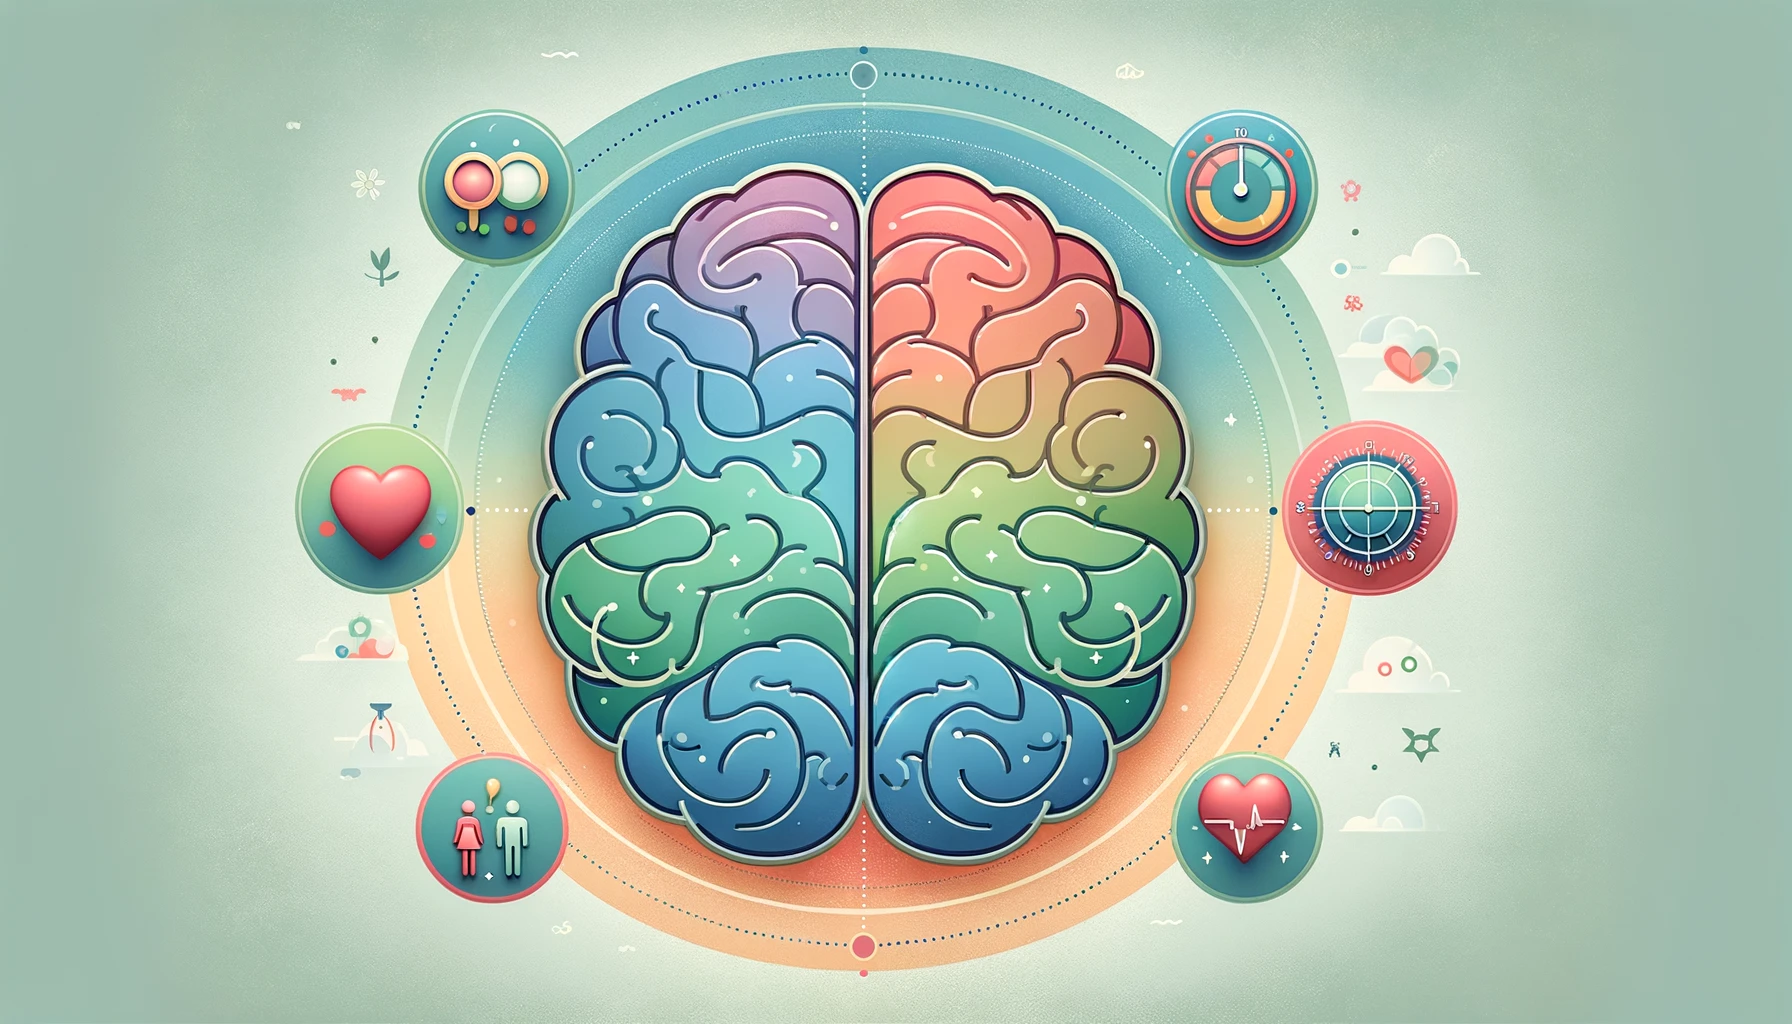 A wide, simple image showcasing the concept of Emotional Intelligence, with a stylized brain divided into colored areas for self-awareness, self-regulation, social awareness, and relationship management, surrounded by relevant icons.